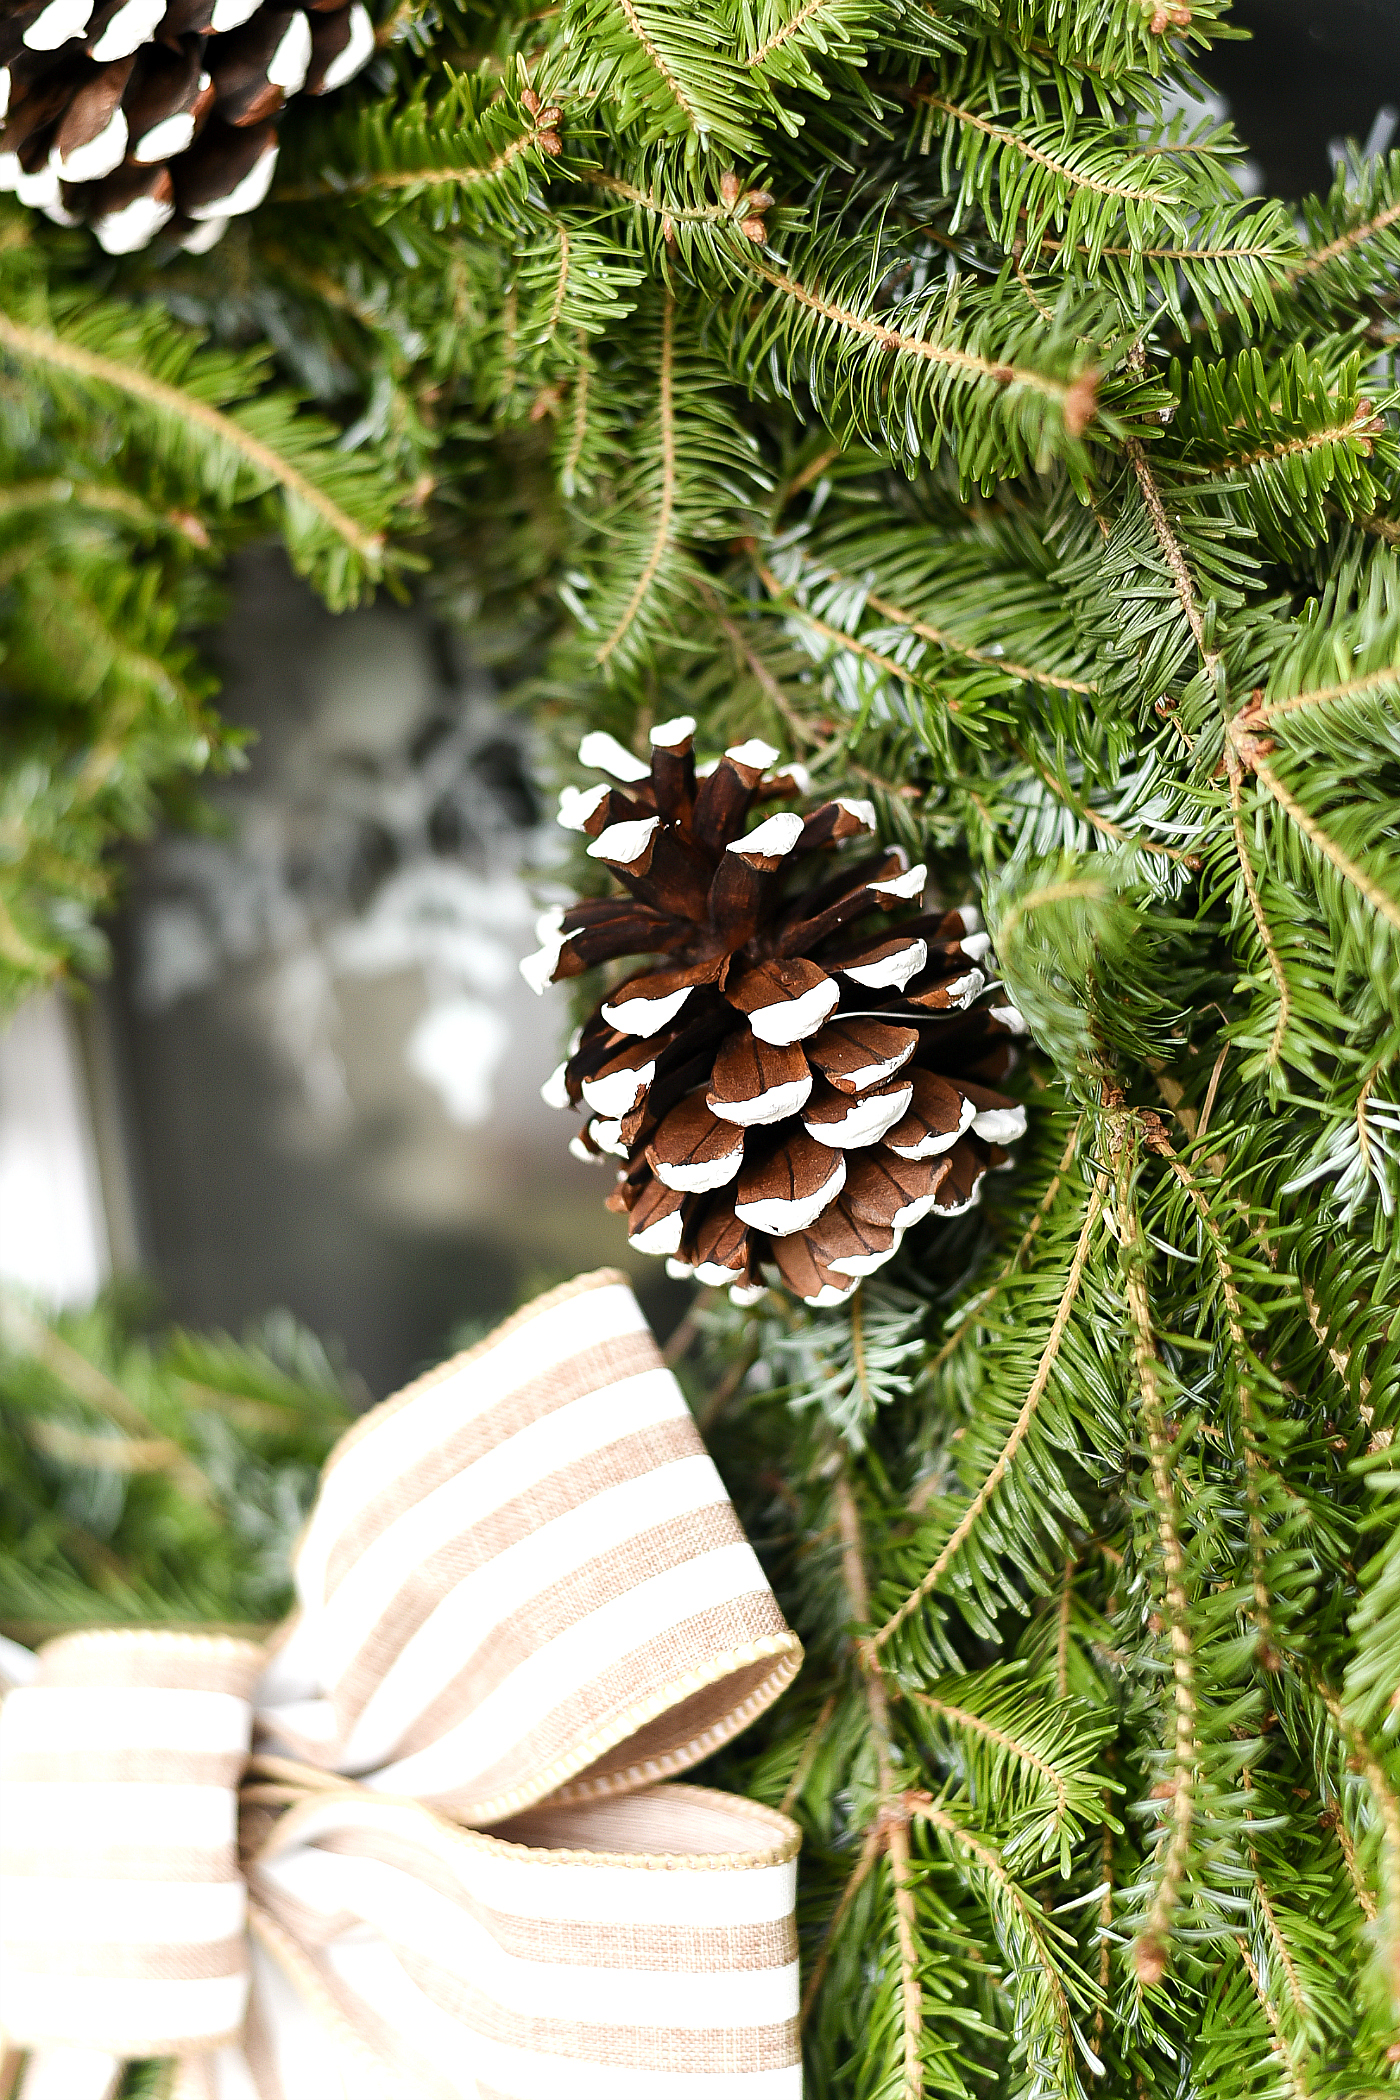 Painted Pine Cone on Wreath